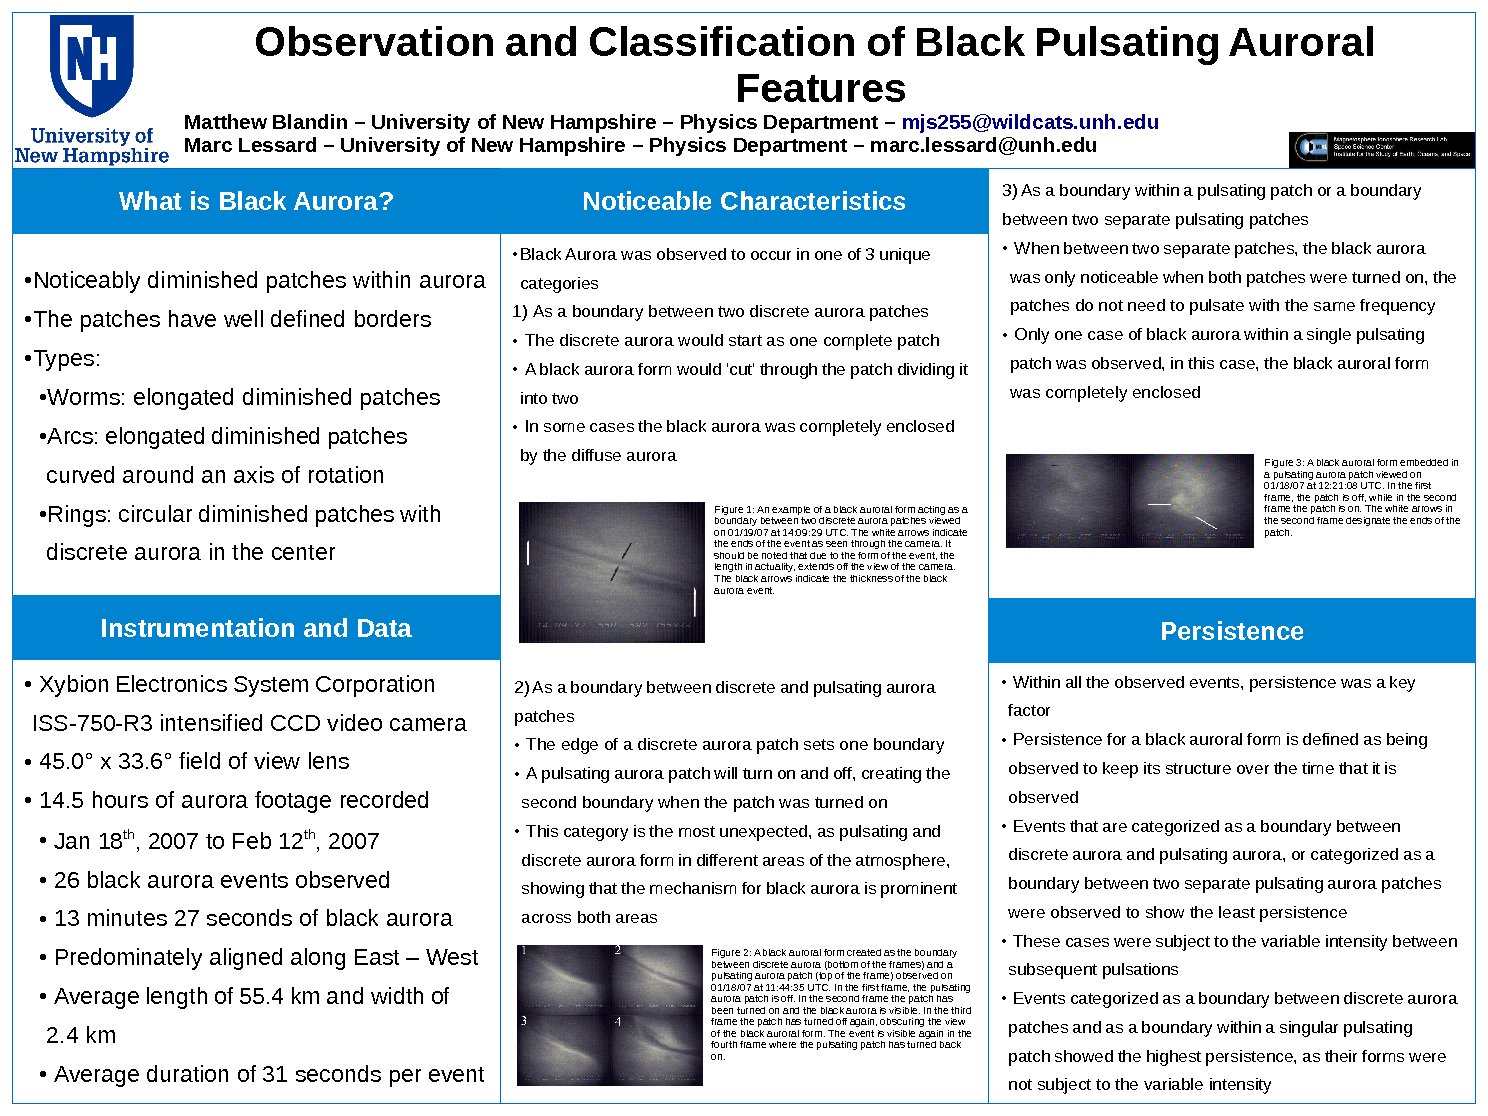 Observations And Classifications Of Black Pulsating Aurora by Mjs255